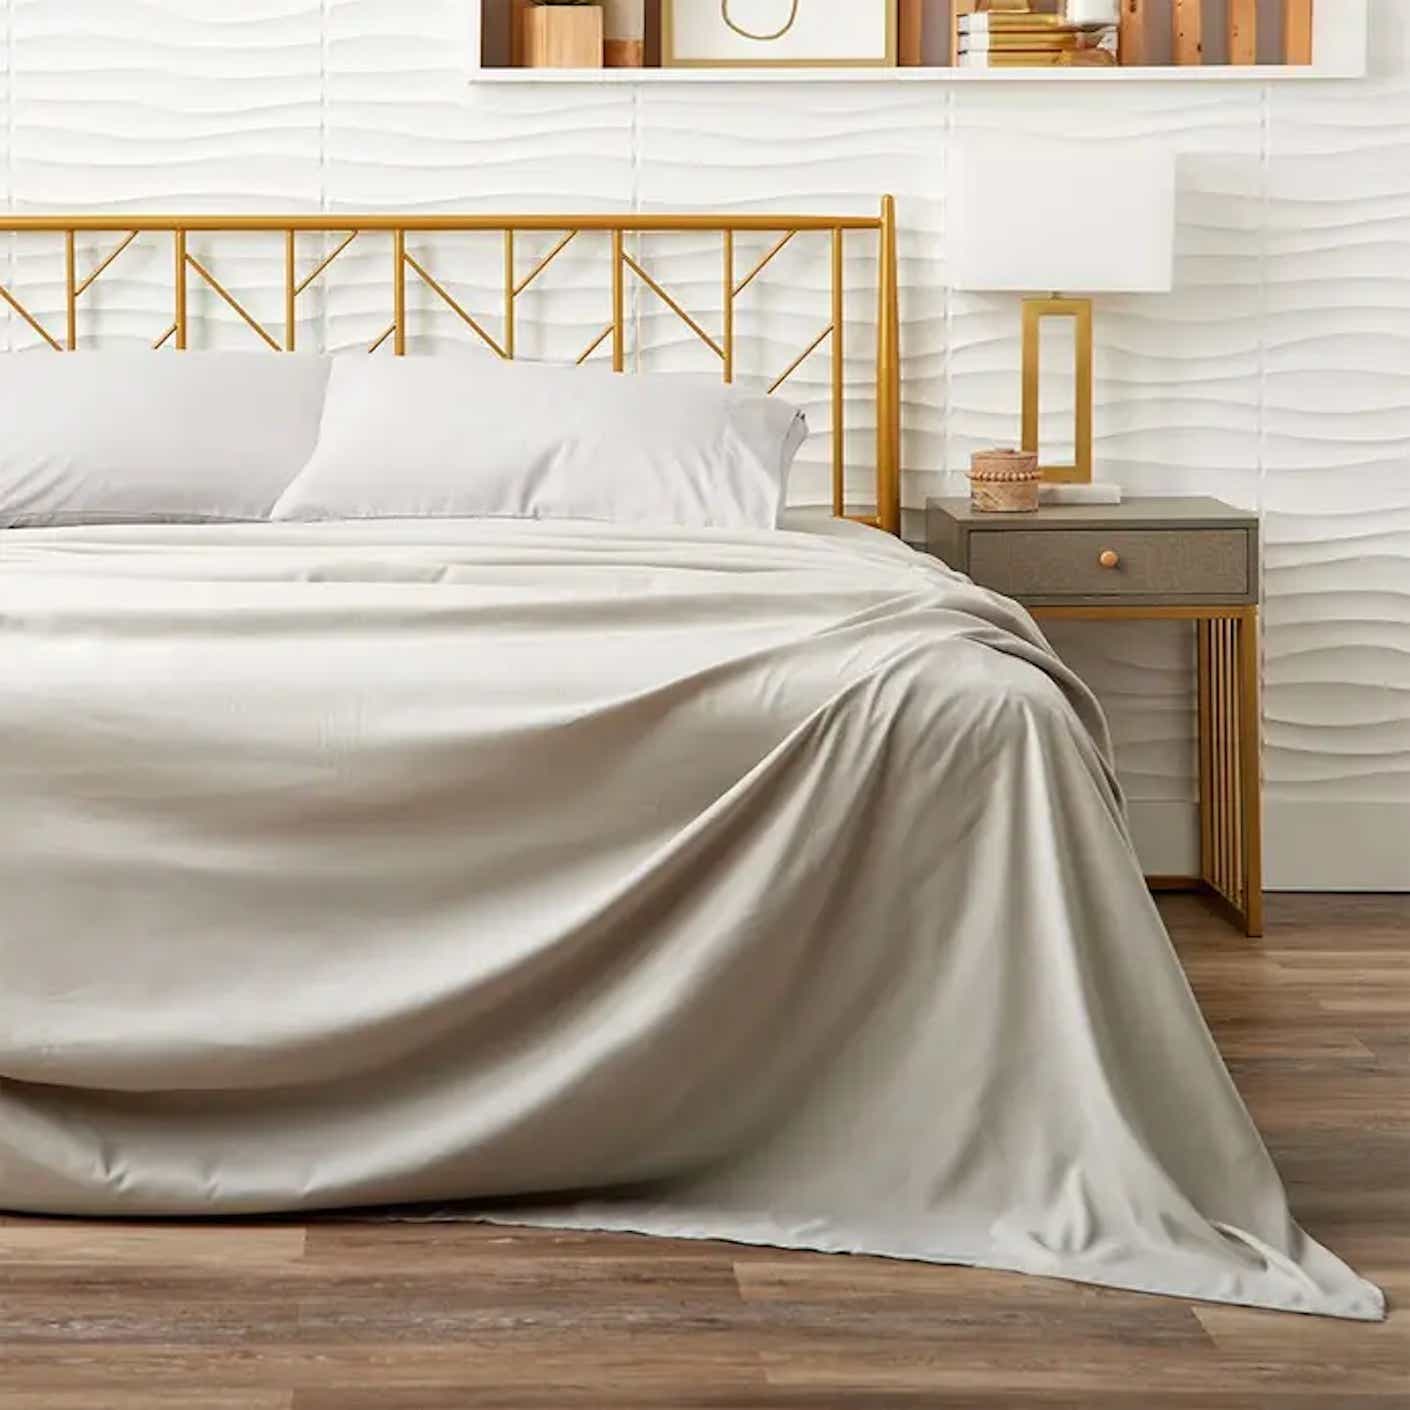 A bed is covered with white sheets.